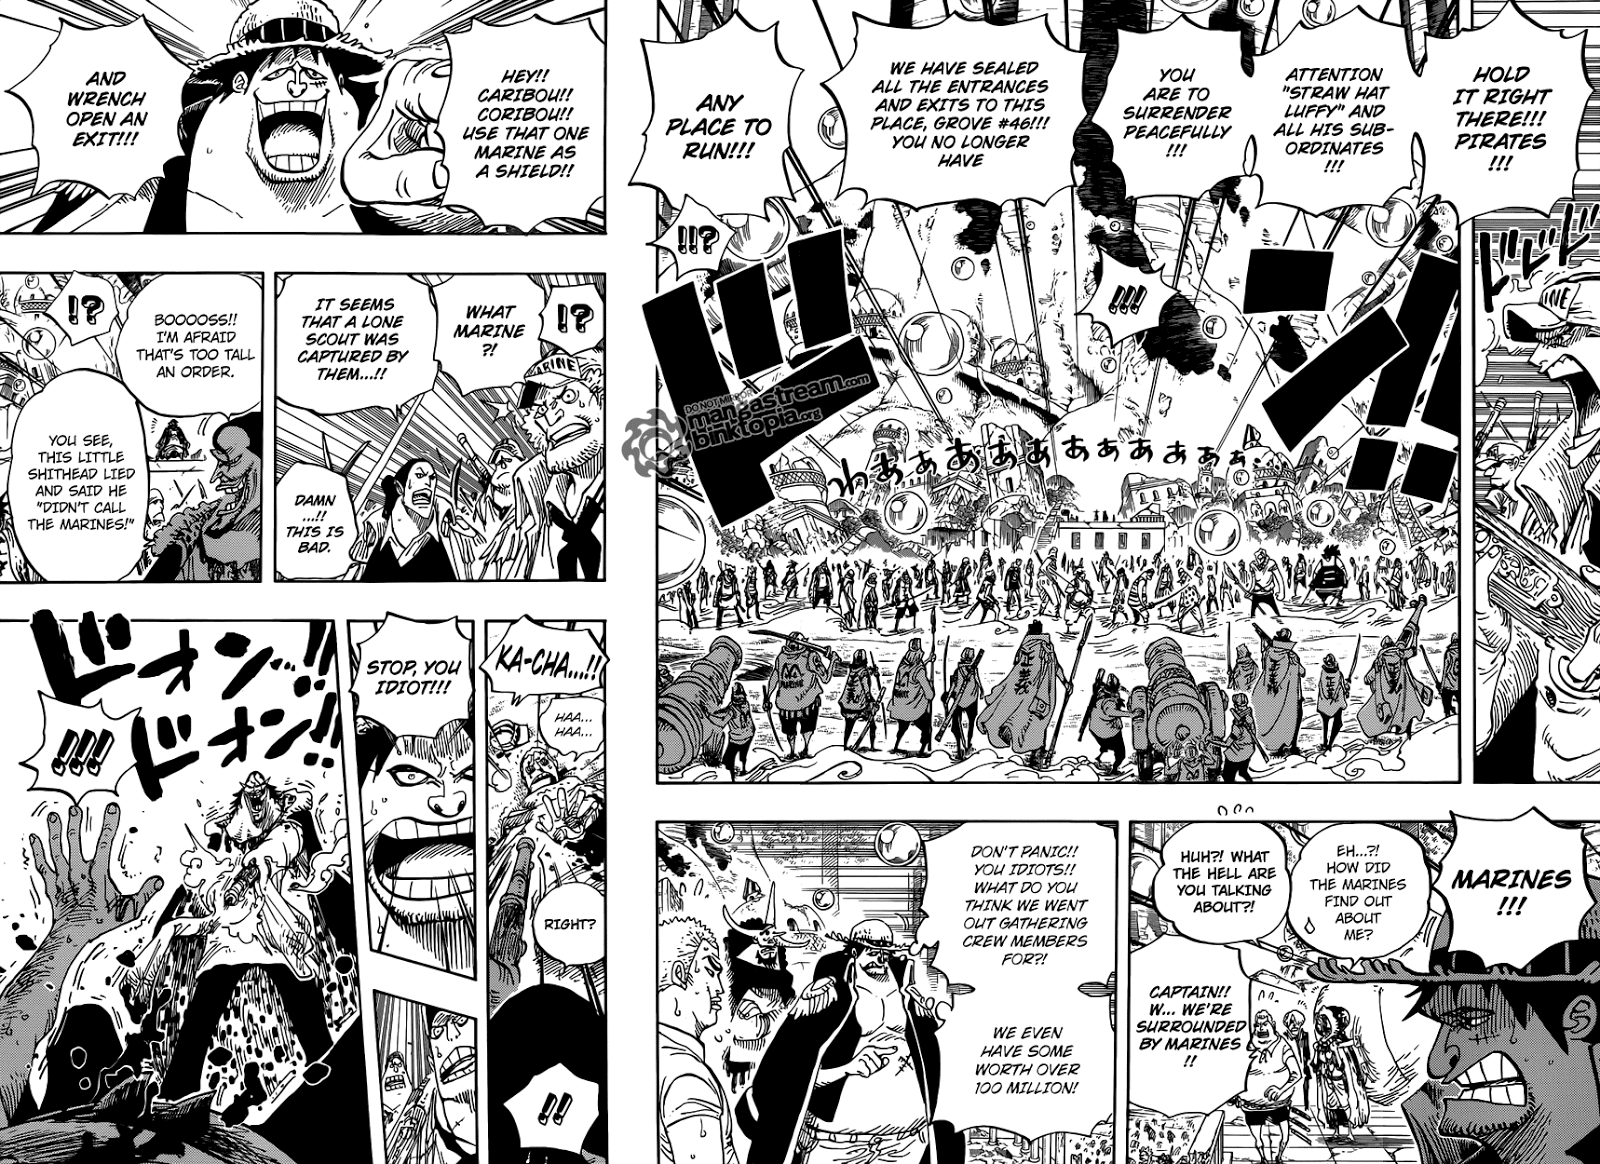 Read One Piece 601 Online | 03 - Press F5 to reload this image